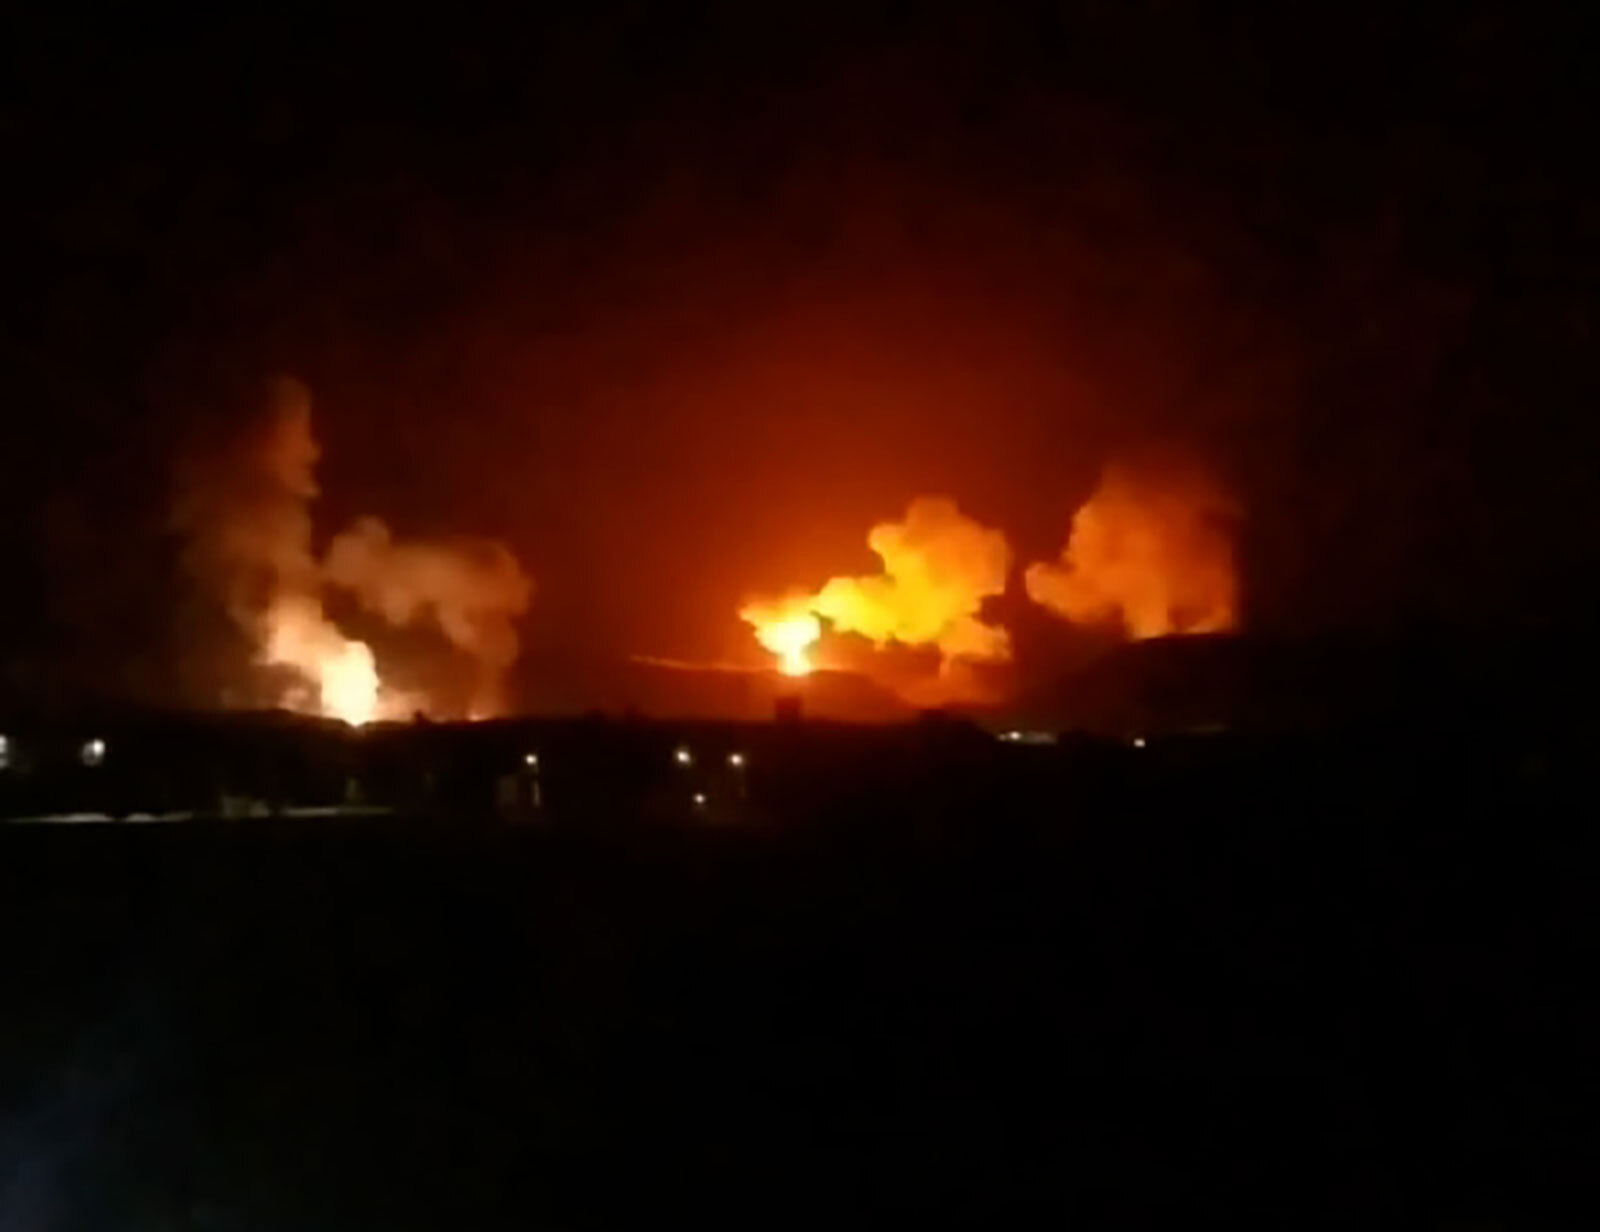 A still from a video shows multiple explosions in Saada province, north of Sanaa, Yemen, on January 12, local time.